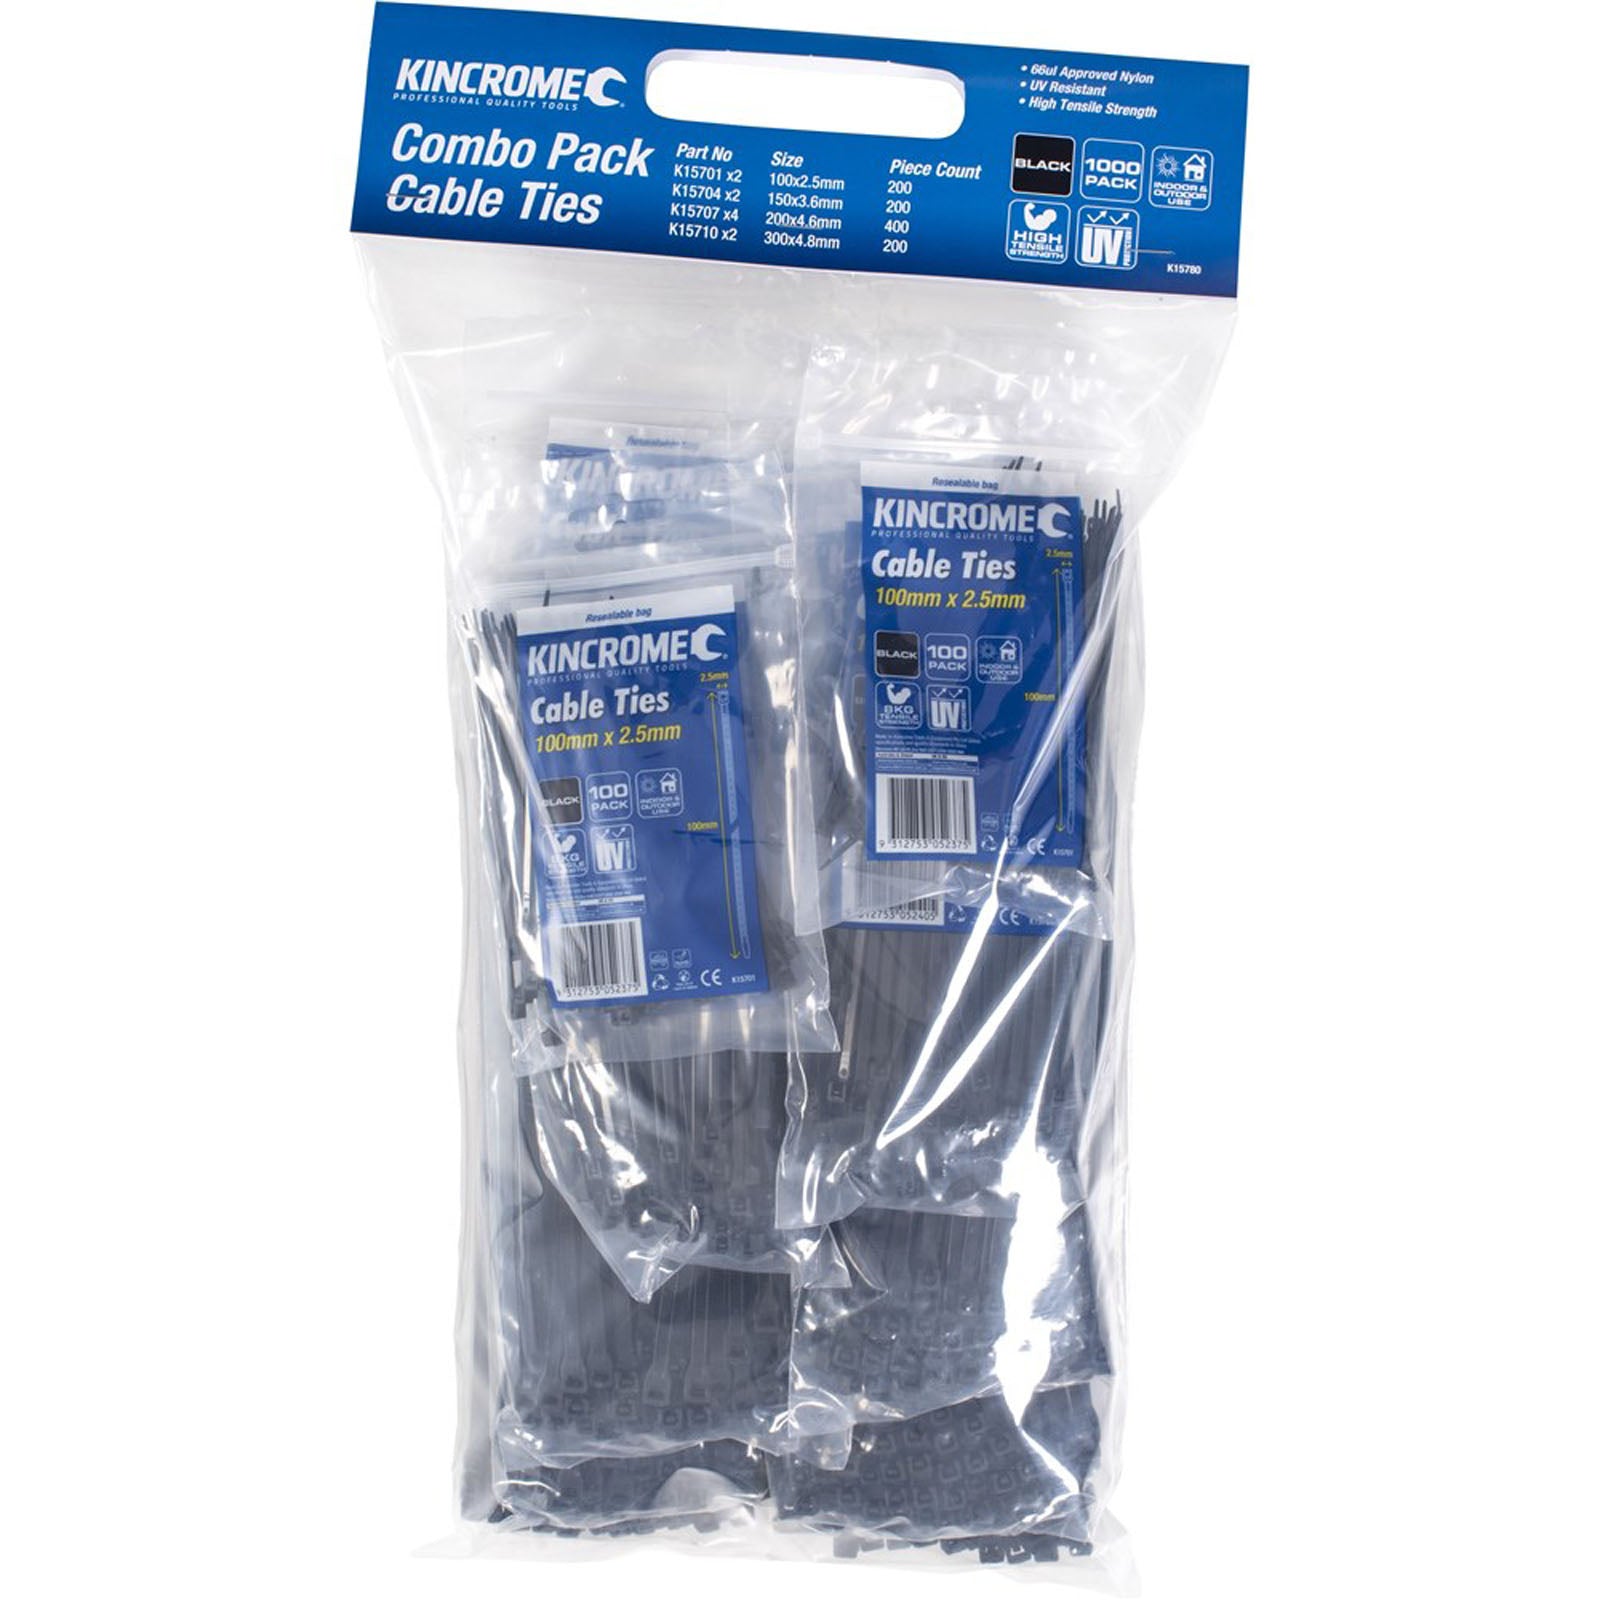 Black Cable Tie Combo Pack 1000 Piece - K15780 by Kincrome